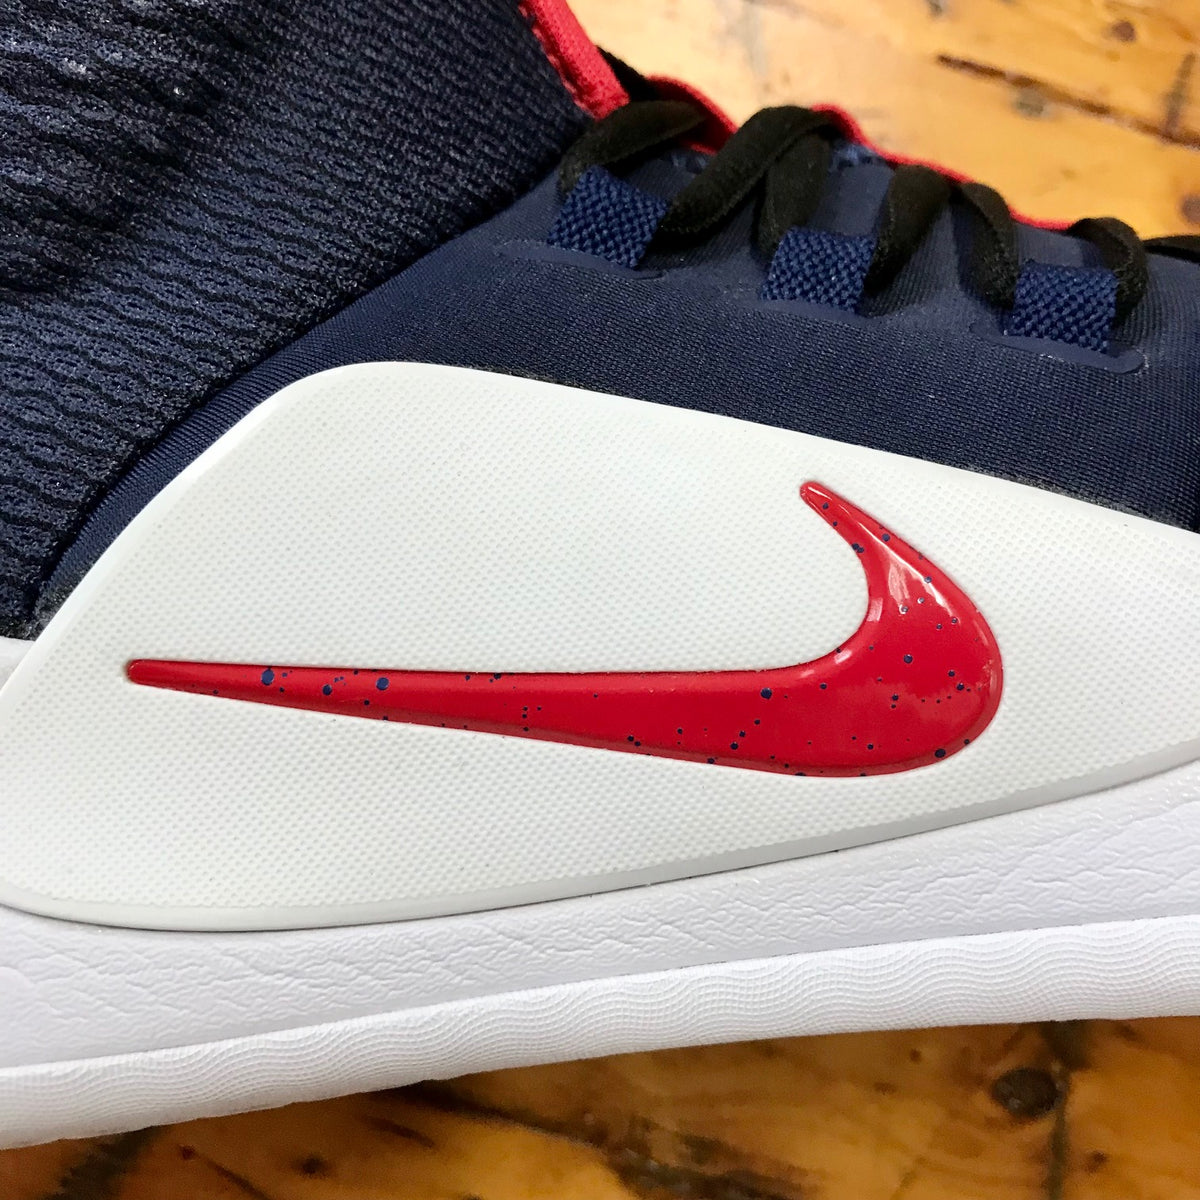 NIKE Hyperdunk EP – Cashed Out Vintage